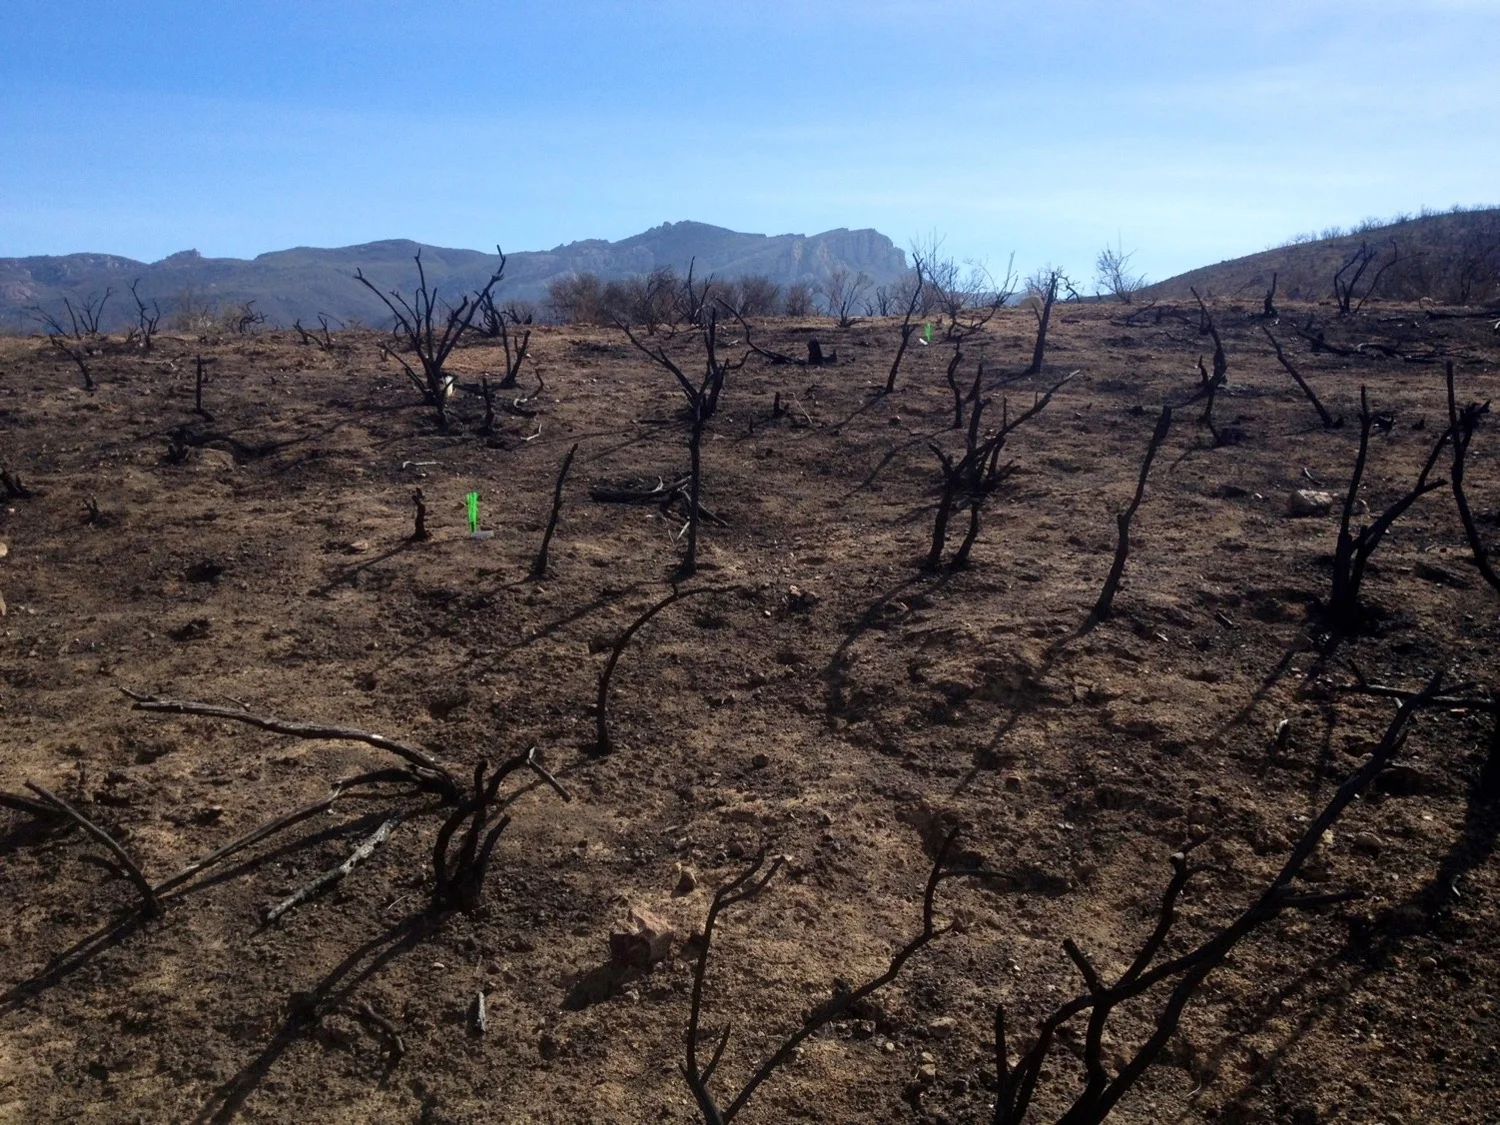 After the Springs Fire in 2013, scientists led by Justin Valliere of UC Davis studied how invasive weeds and air pollution impact the resurgence of native plants that usually flourish after a wildfire in the Santa Monica Mountains. (Justin Valliere/UC Davis)